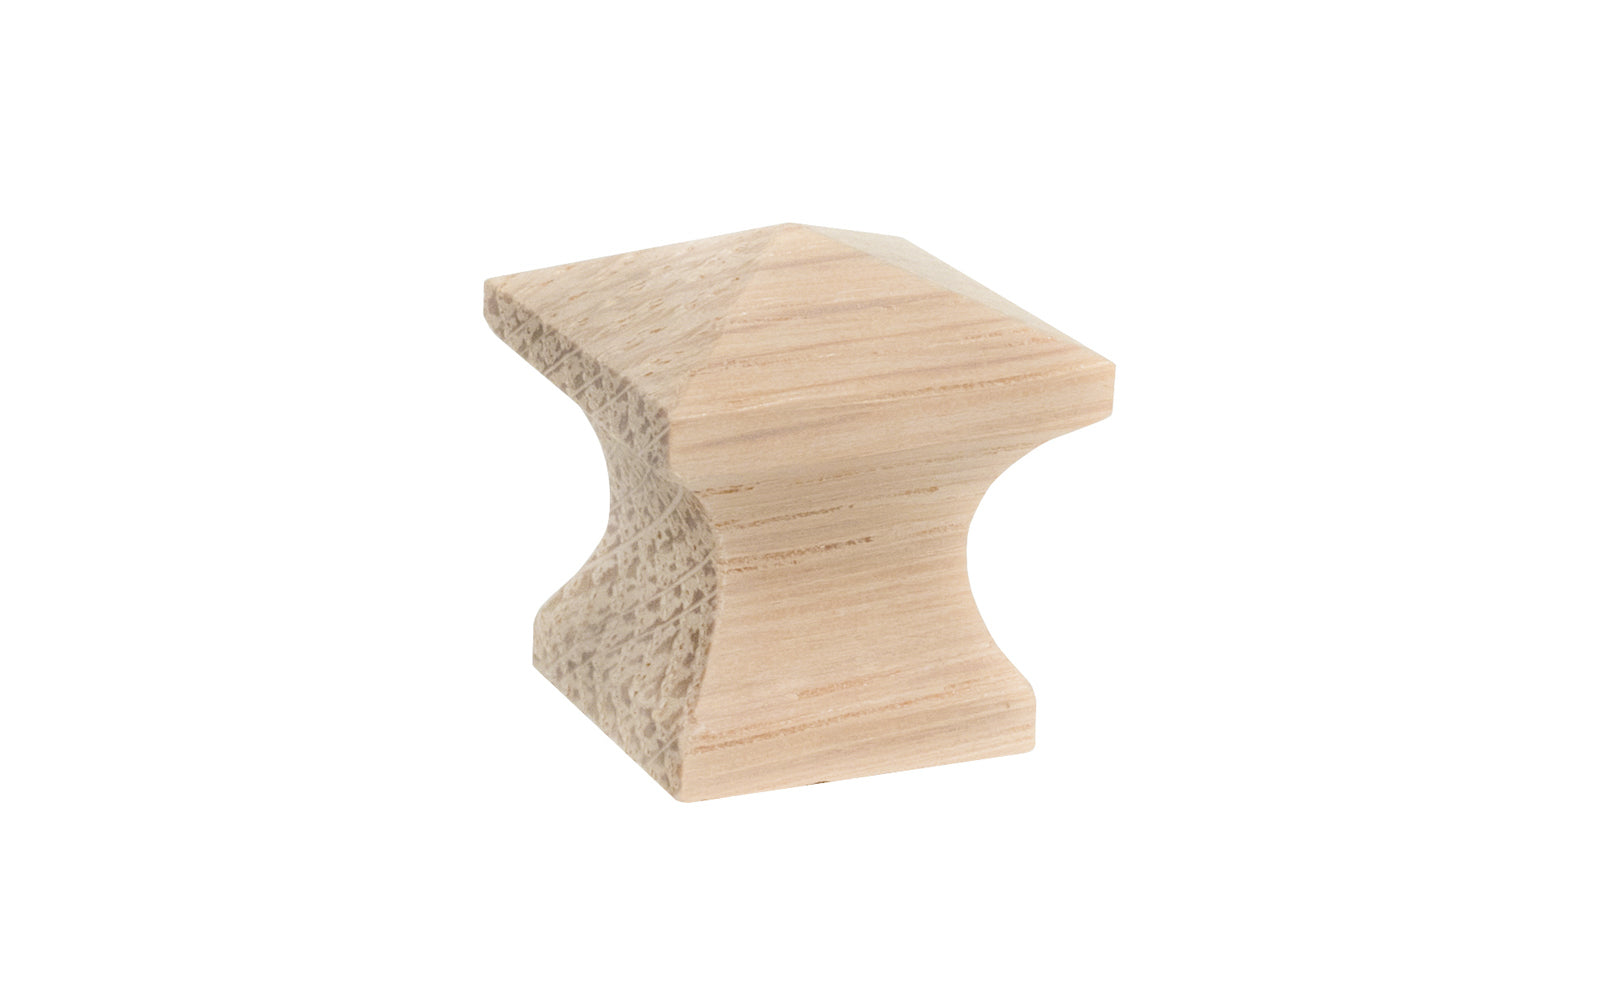 A classic wood pyramid cabinet knob of solid oak material. This good-looking wooden knob has a slight pyramid design & square edges. Designed in the Mission-style / Arts & Crafts, Craftsman style of hardware. Unfinished solid oak wood. May be stained, painted, or varnished. 3/4